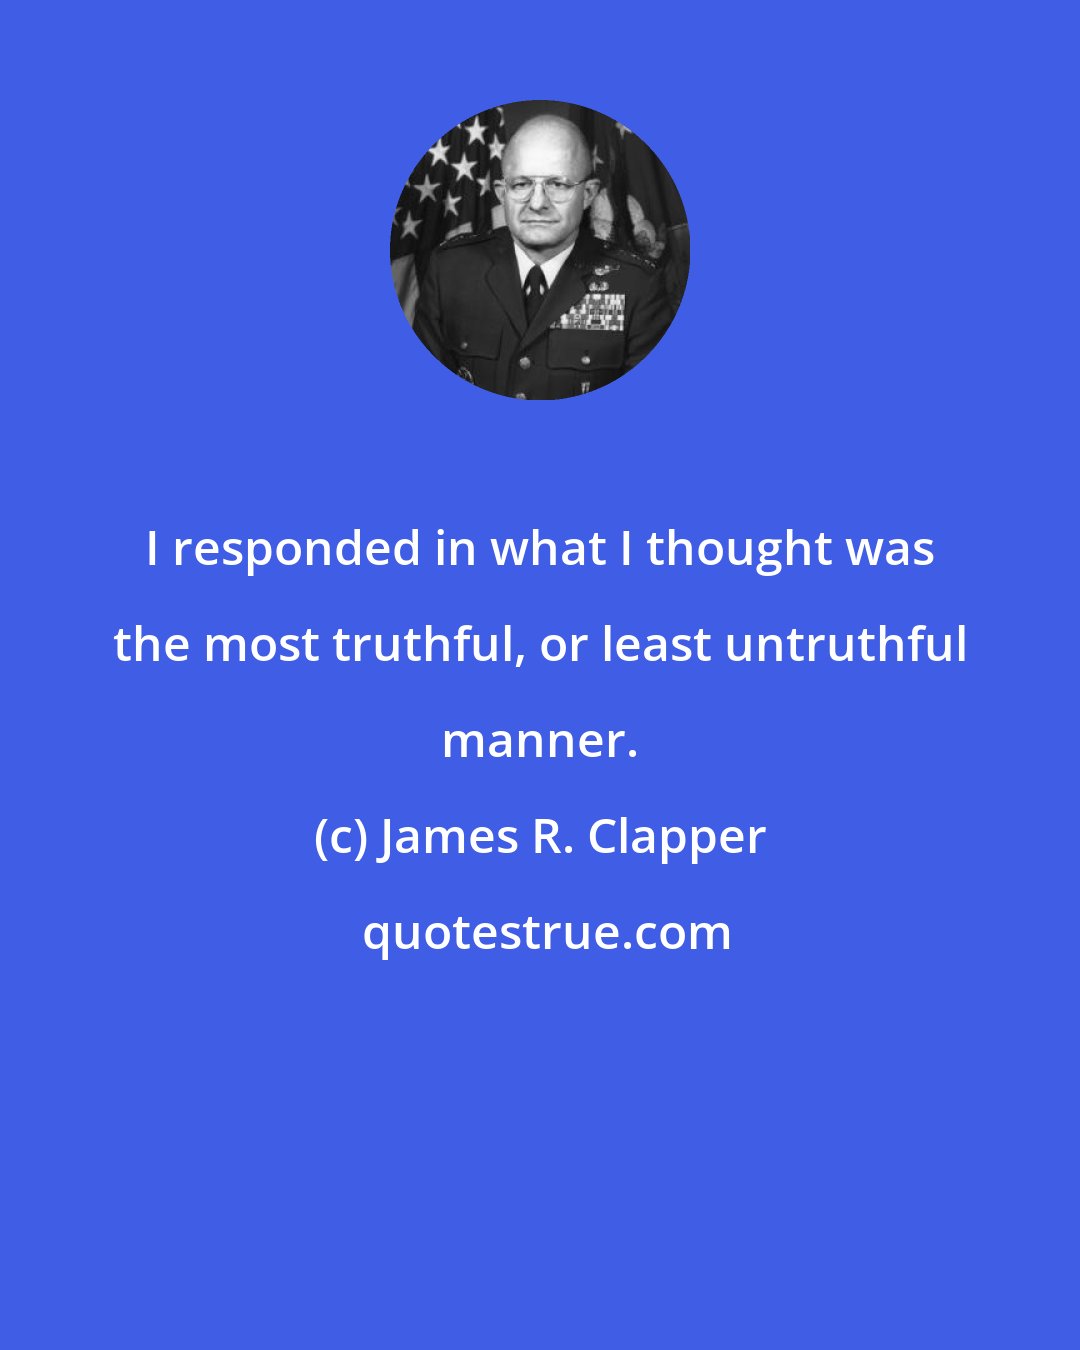 James R. Clapper: I responded in what I thought was the most truthful, or least untruthful manner.